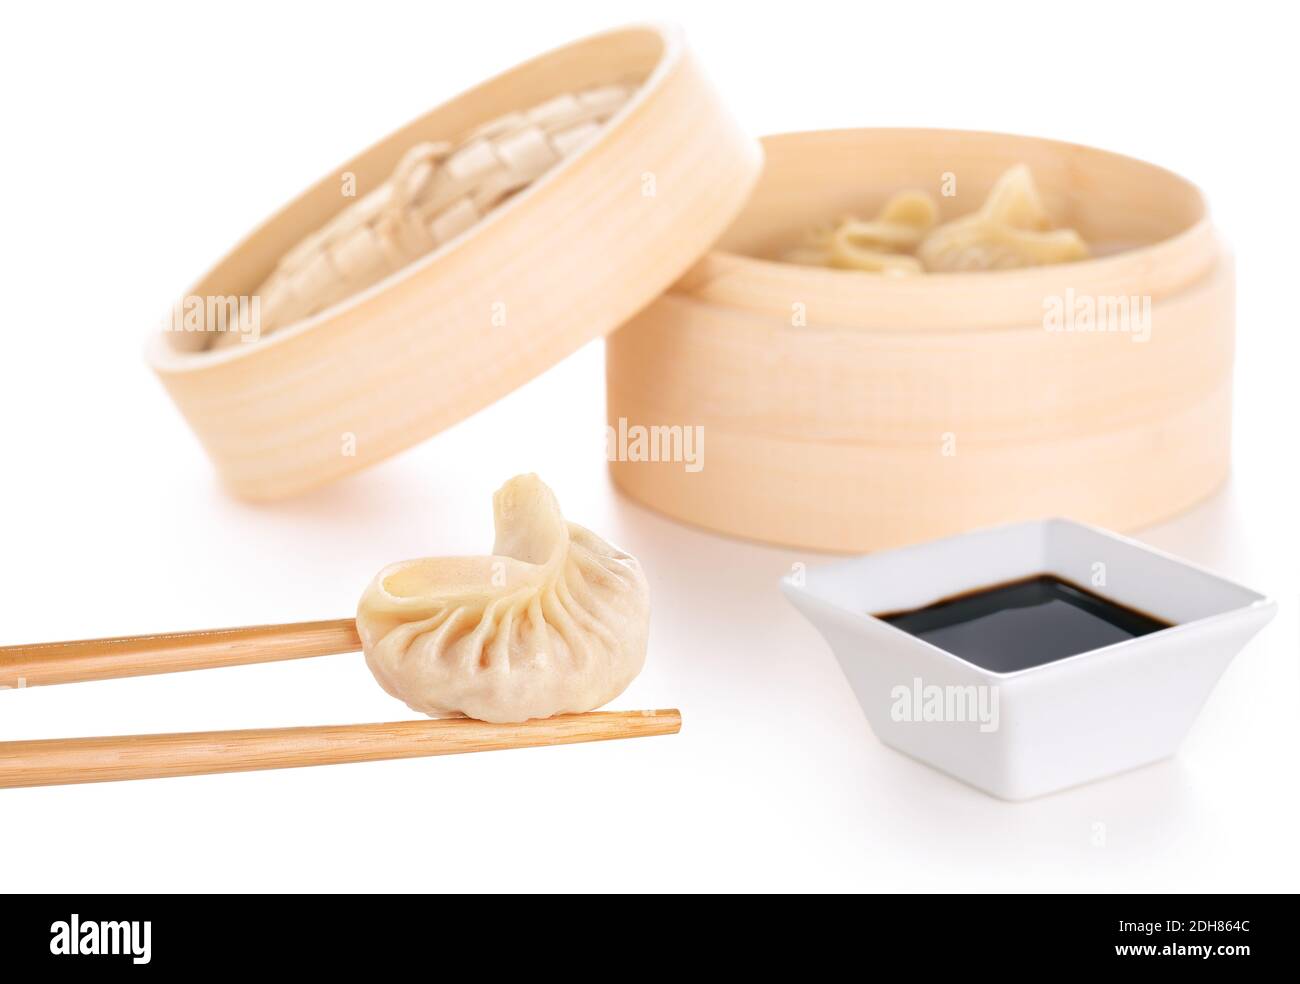 chopsticks holding a chinese dumpling, soy sauce and bamboo basket in white background Stock Photo